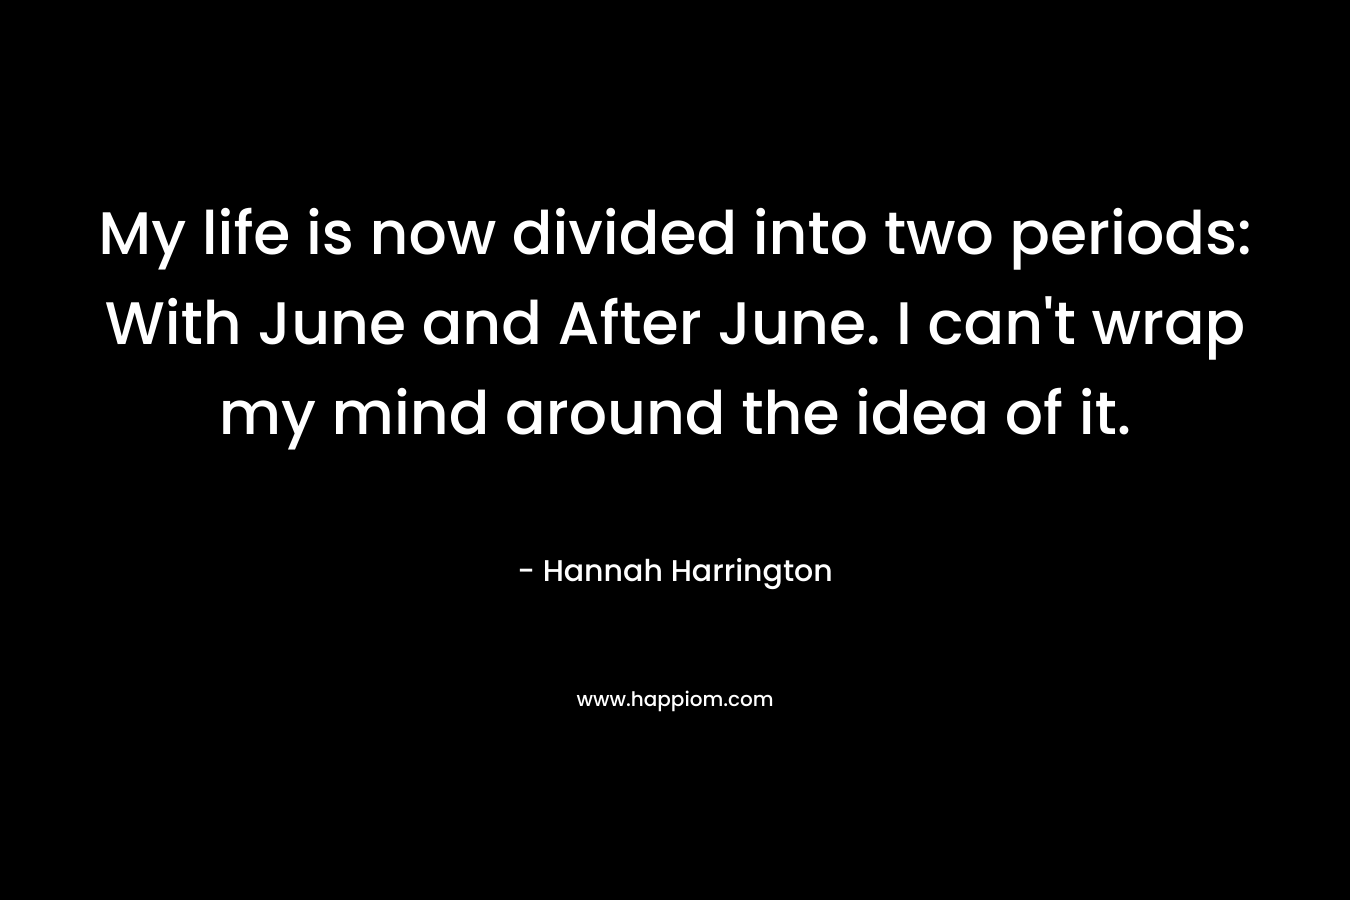 My life is now divided into two periods: With June and After June. I can’t wrap my mind around the idea of it. – Hannah Harrington